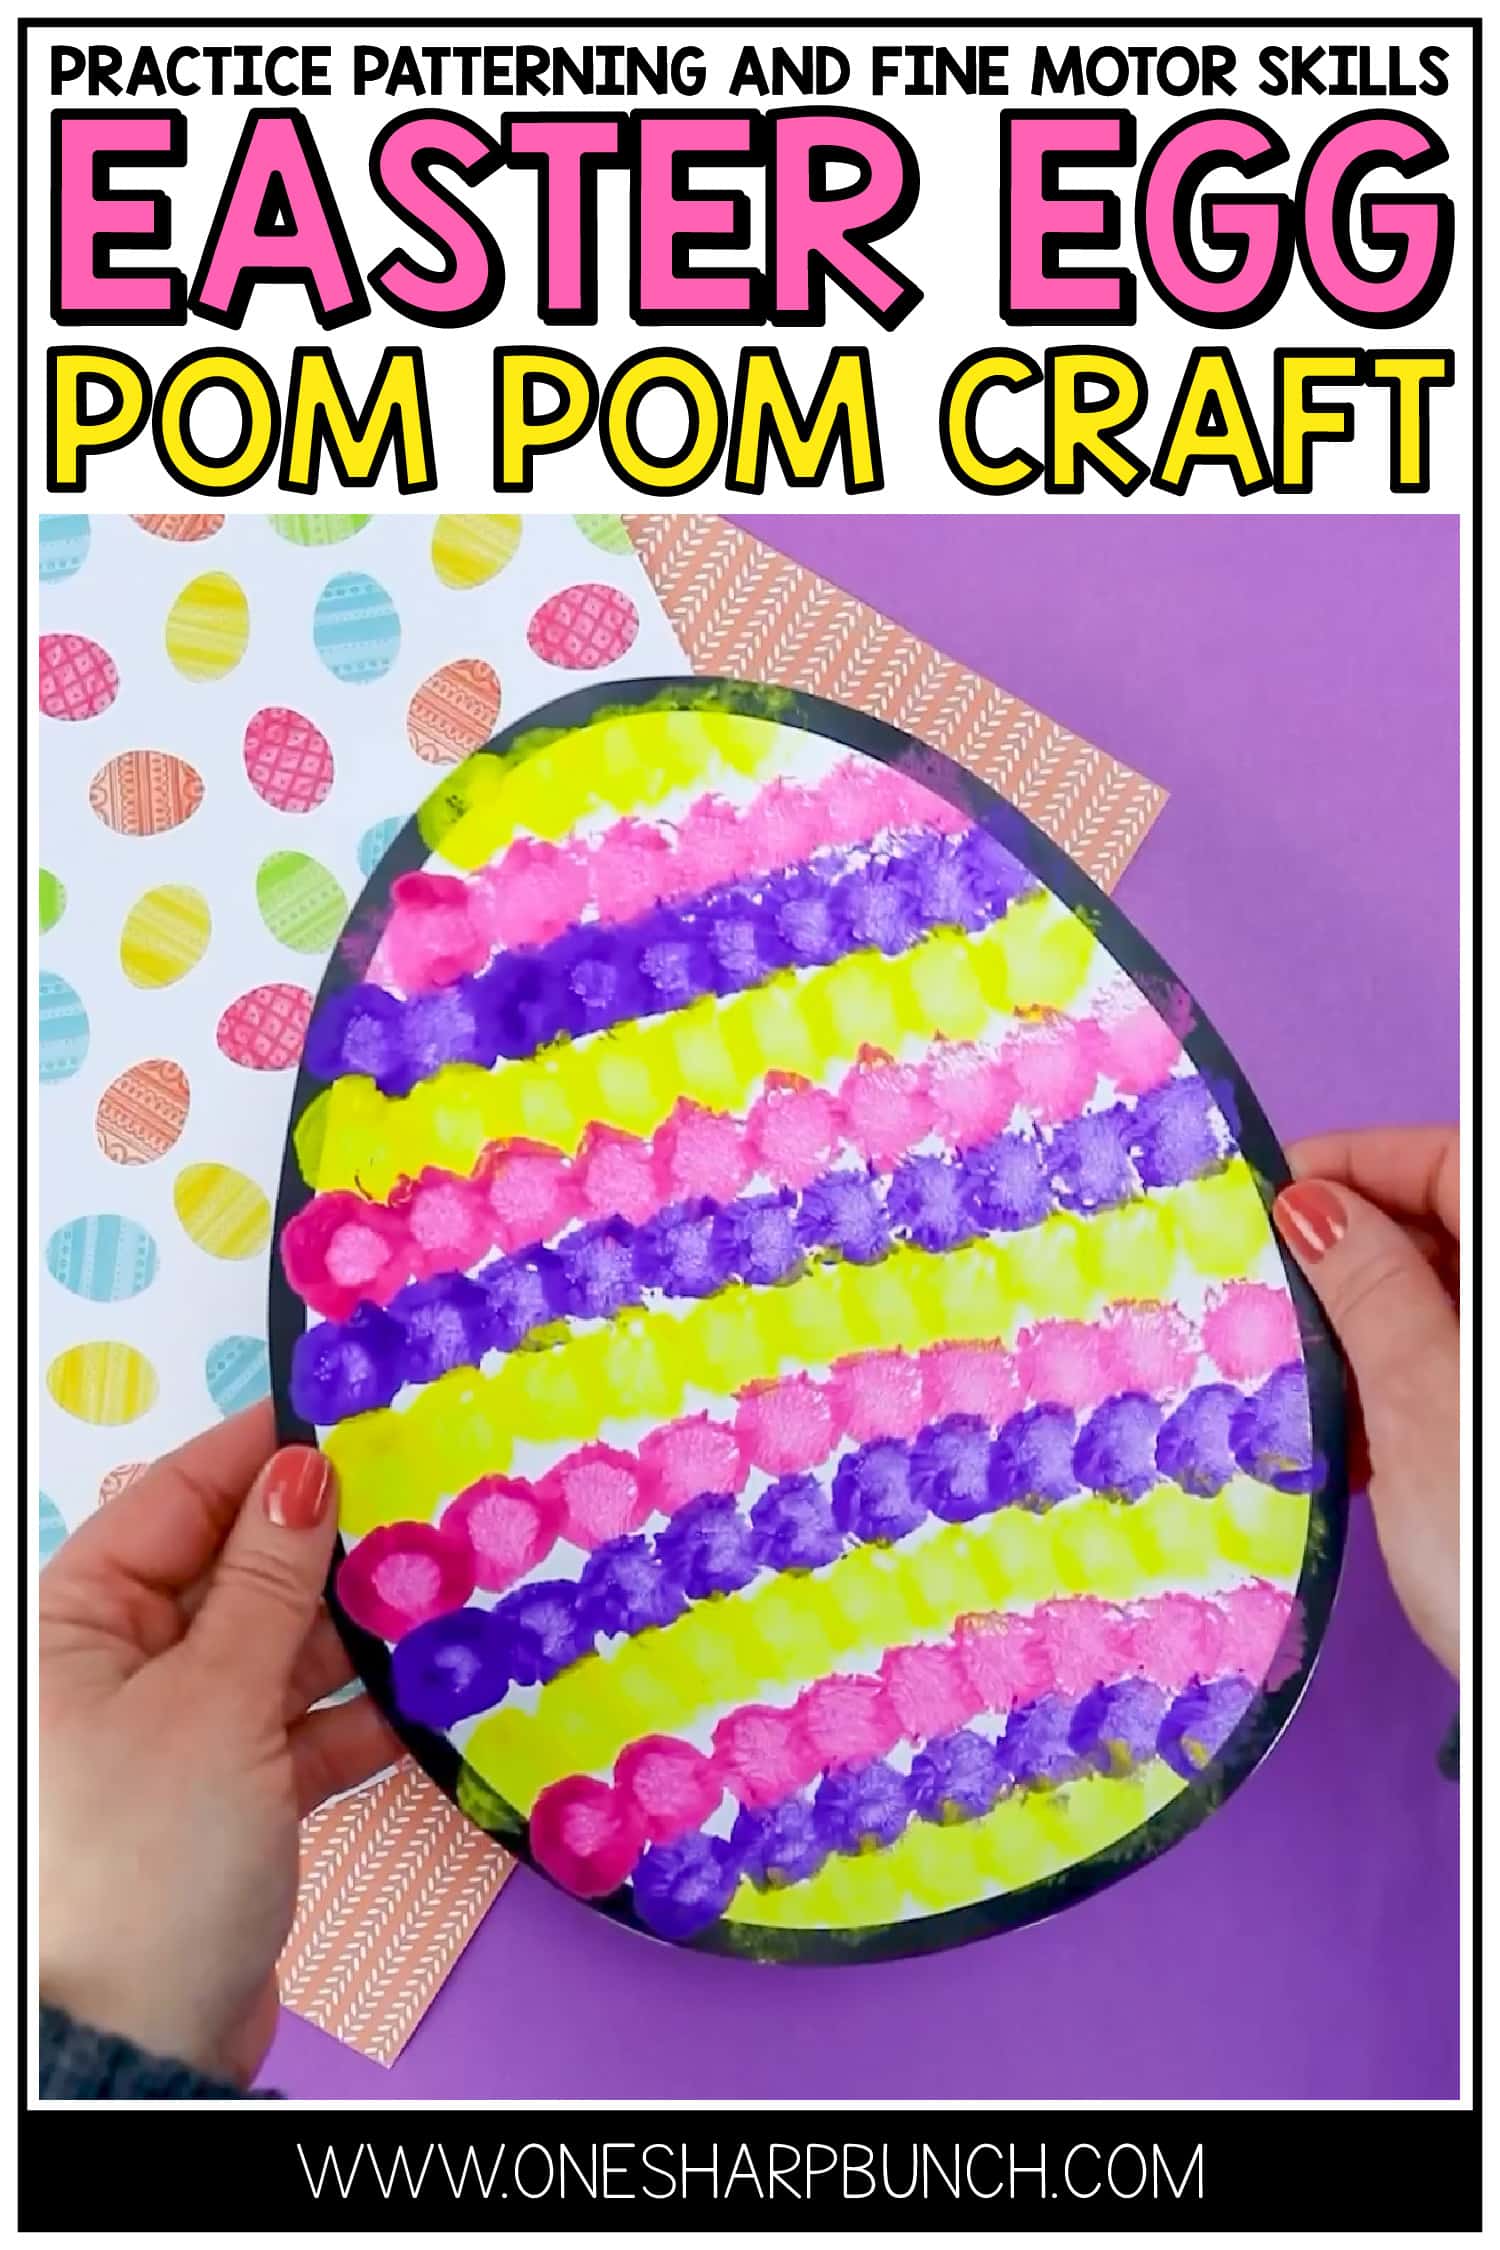 Celebrate spring with these bright and colorful eggs! Invite your preschool and kindergarten students to practice making patterns with this pom pom painted Easter egg craft. Not only is this colorful egg craft perfect for creating patterns, it is also perfect for building fine motor skills! It’s one of the best spring crafts for kids, especially since each one turns out beautifully unique! #finemotorskills #kindergarten #preschool #craftsforkids #kidscrafts #teacher #springcrafts #easter